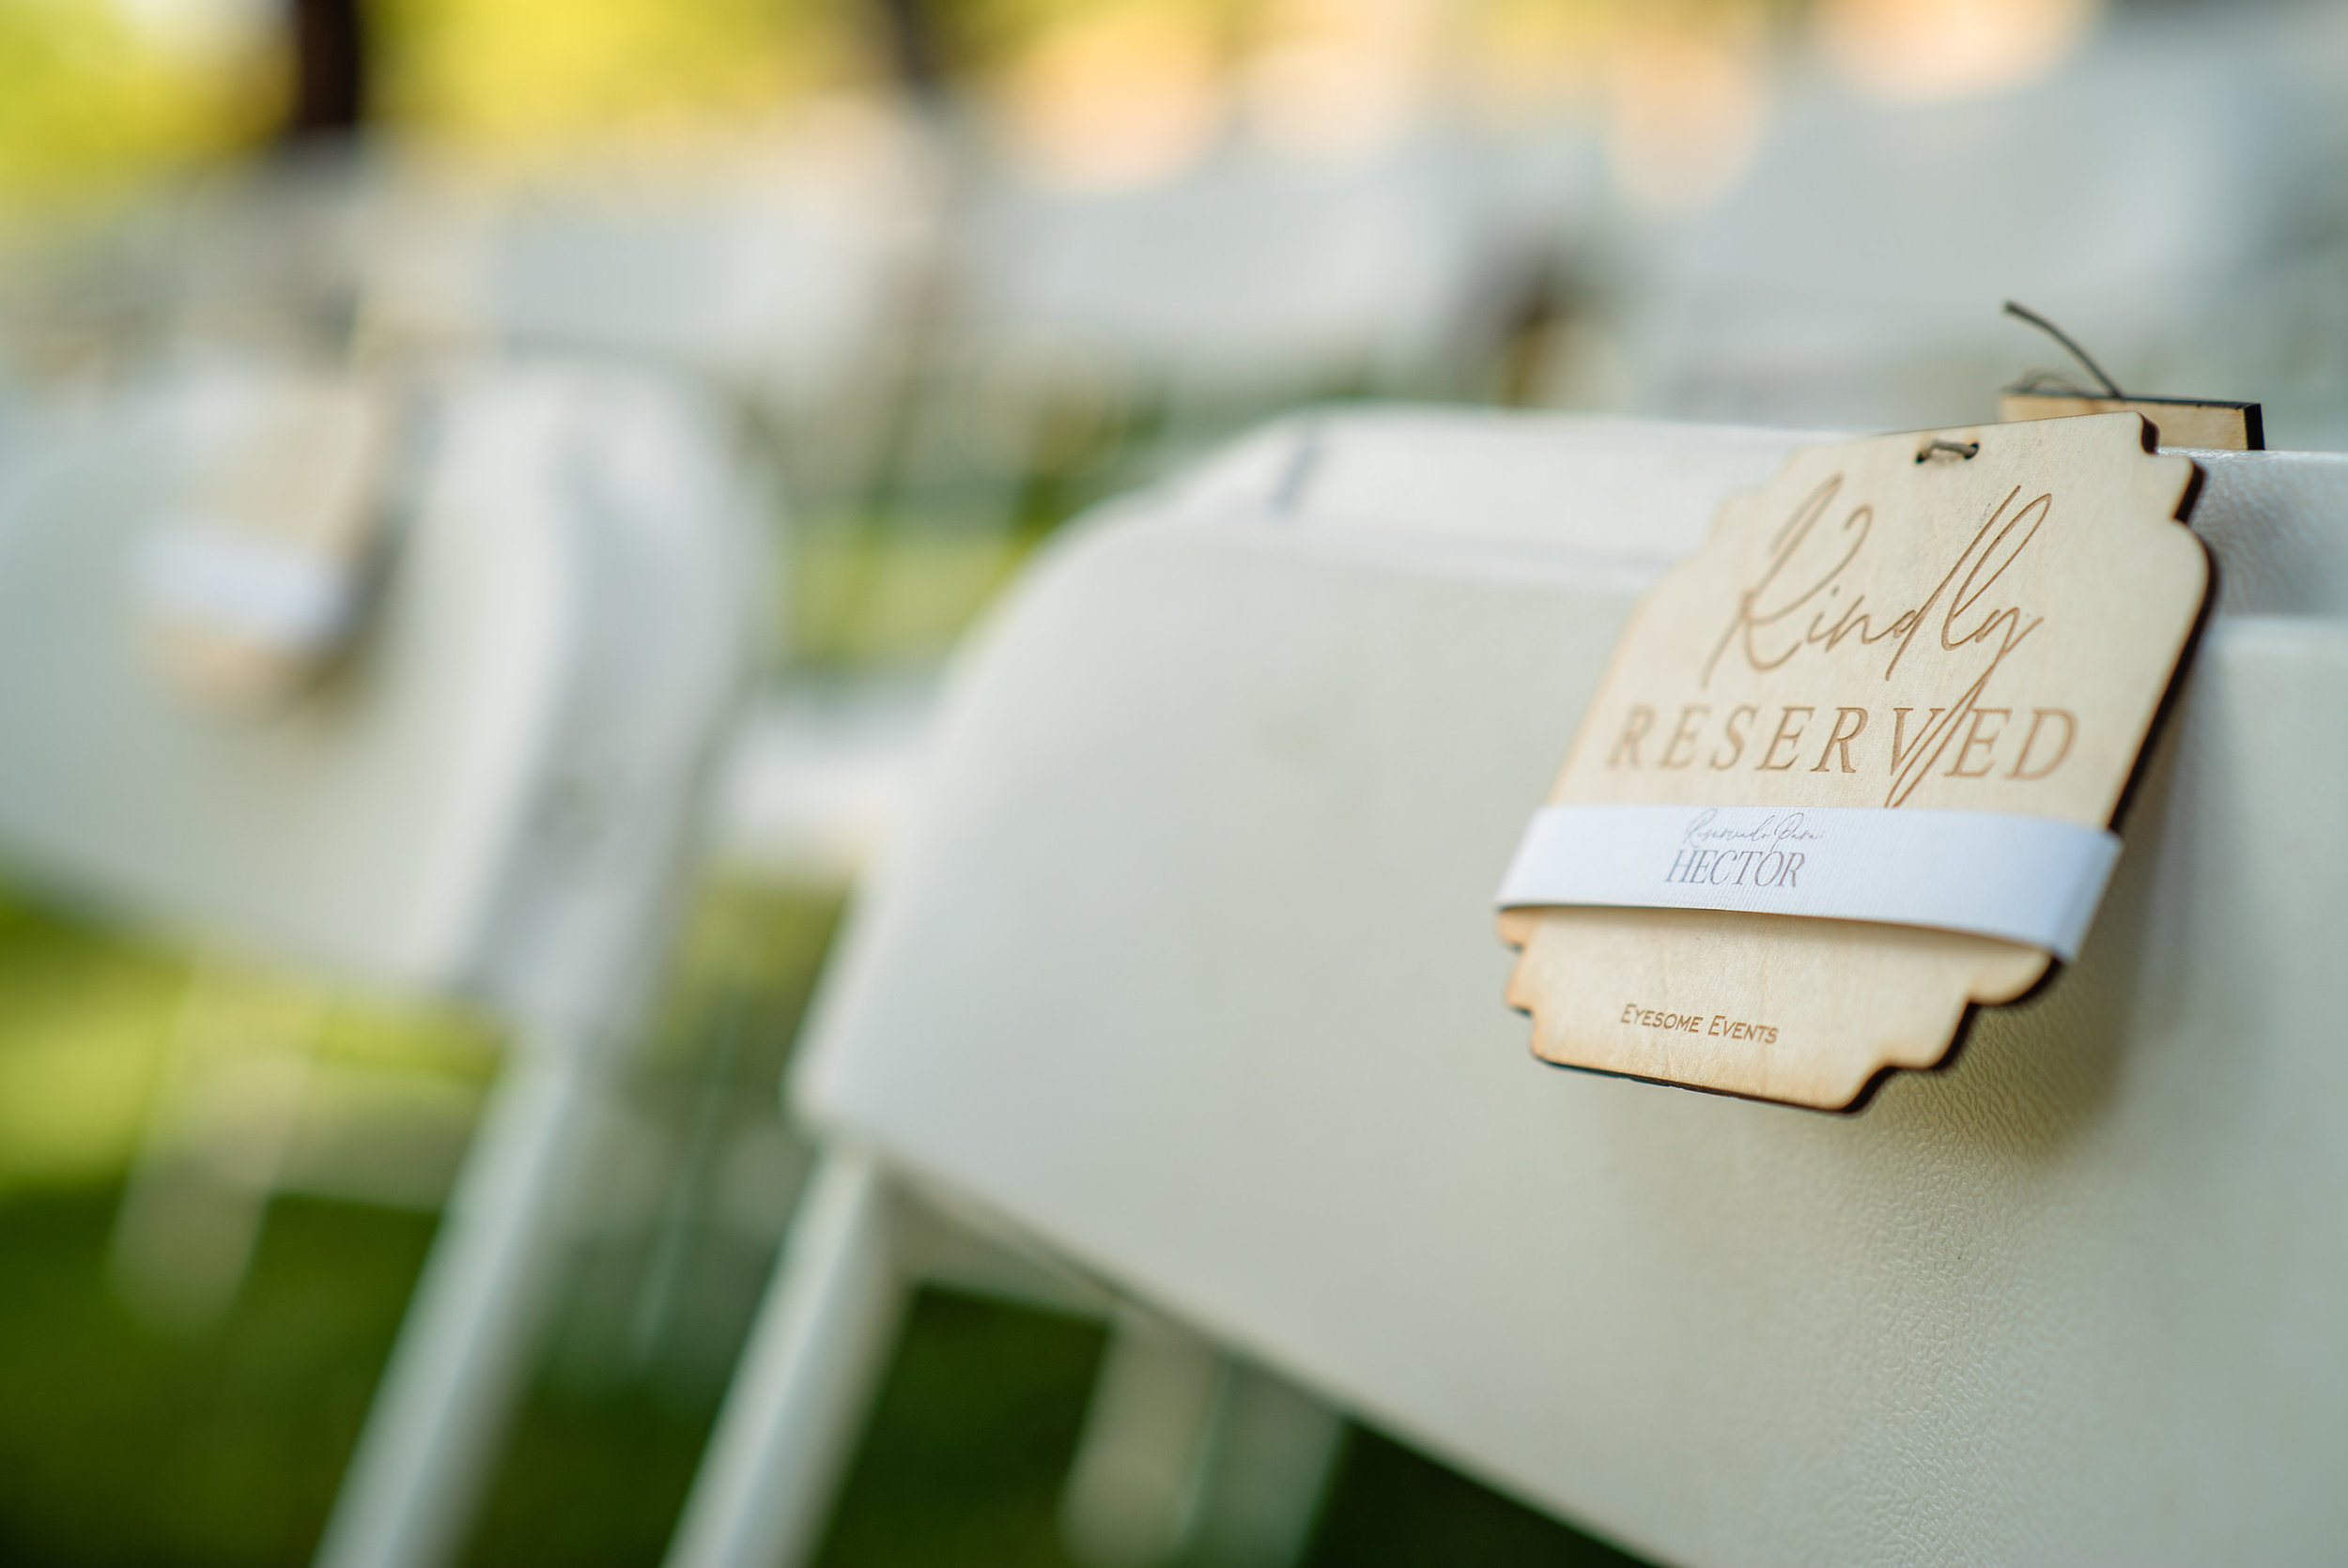 Copy of Kindly Reserved Ceremony 